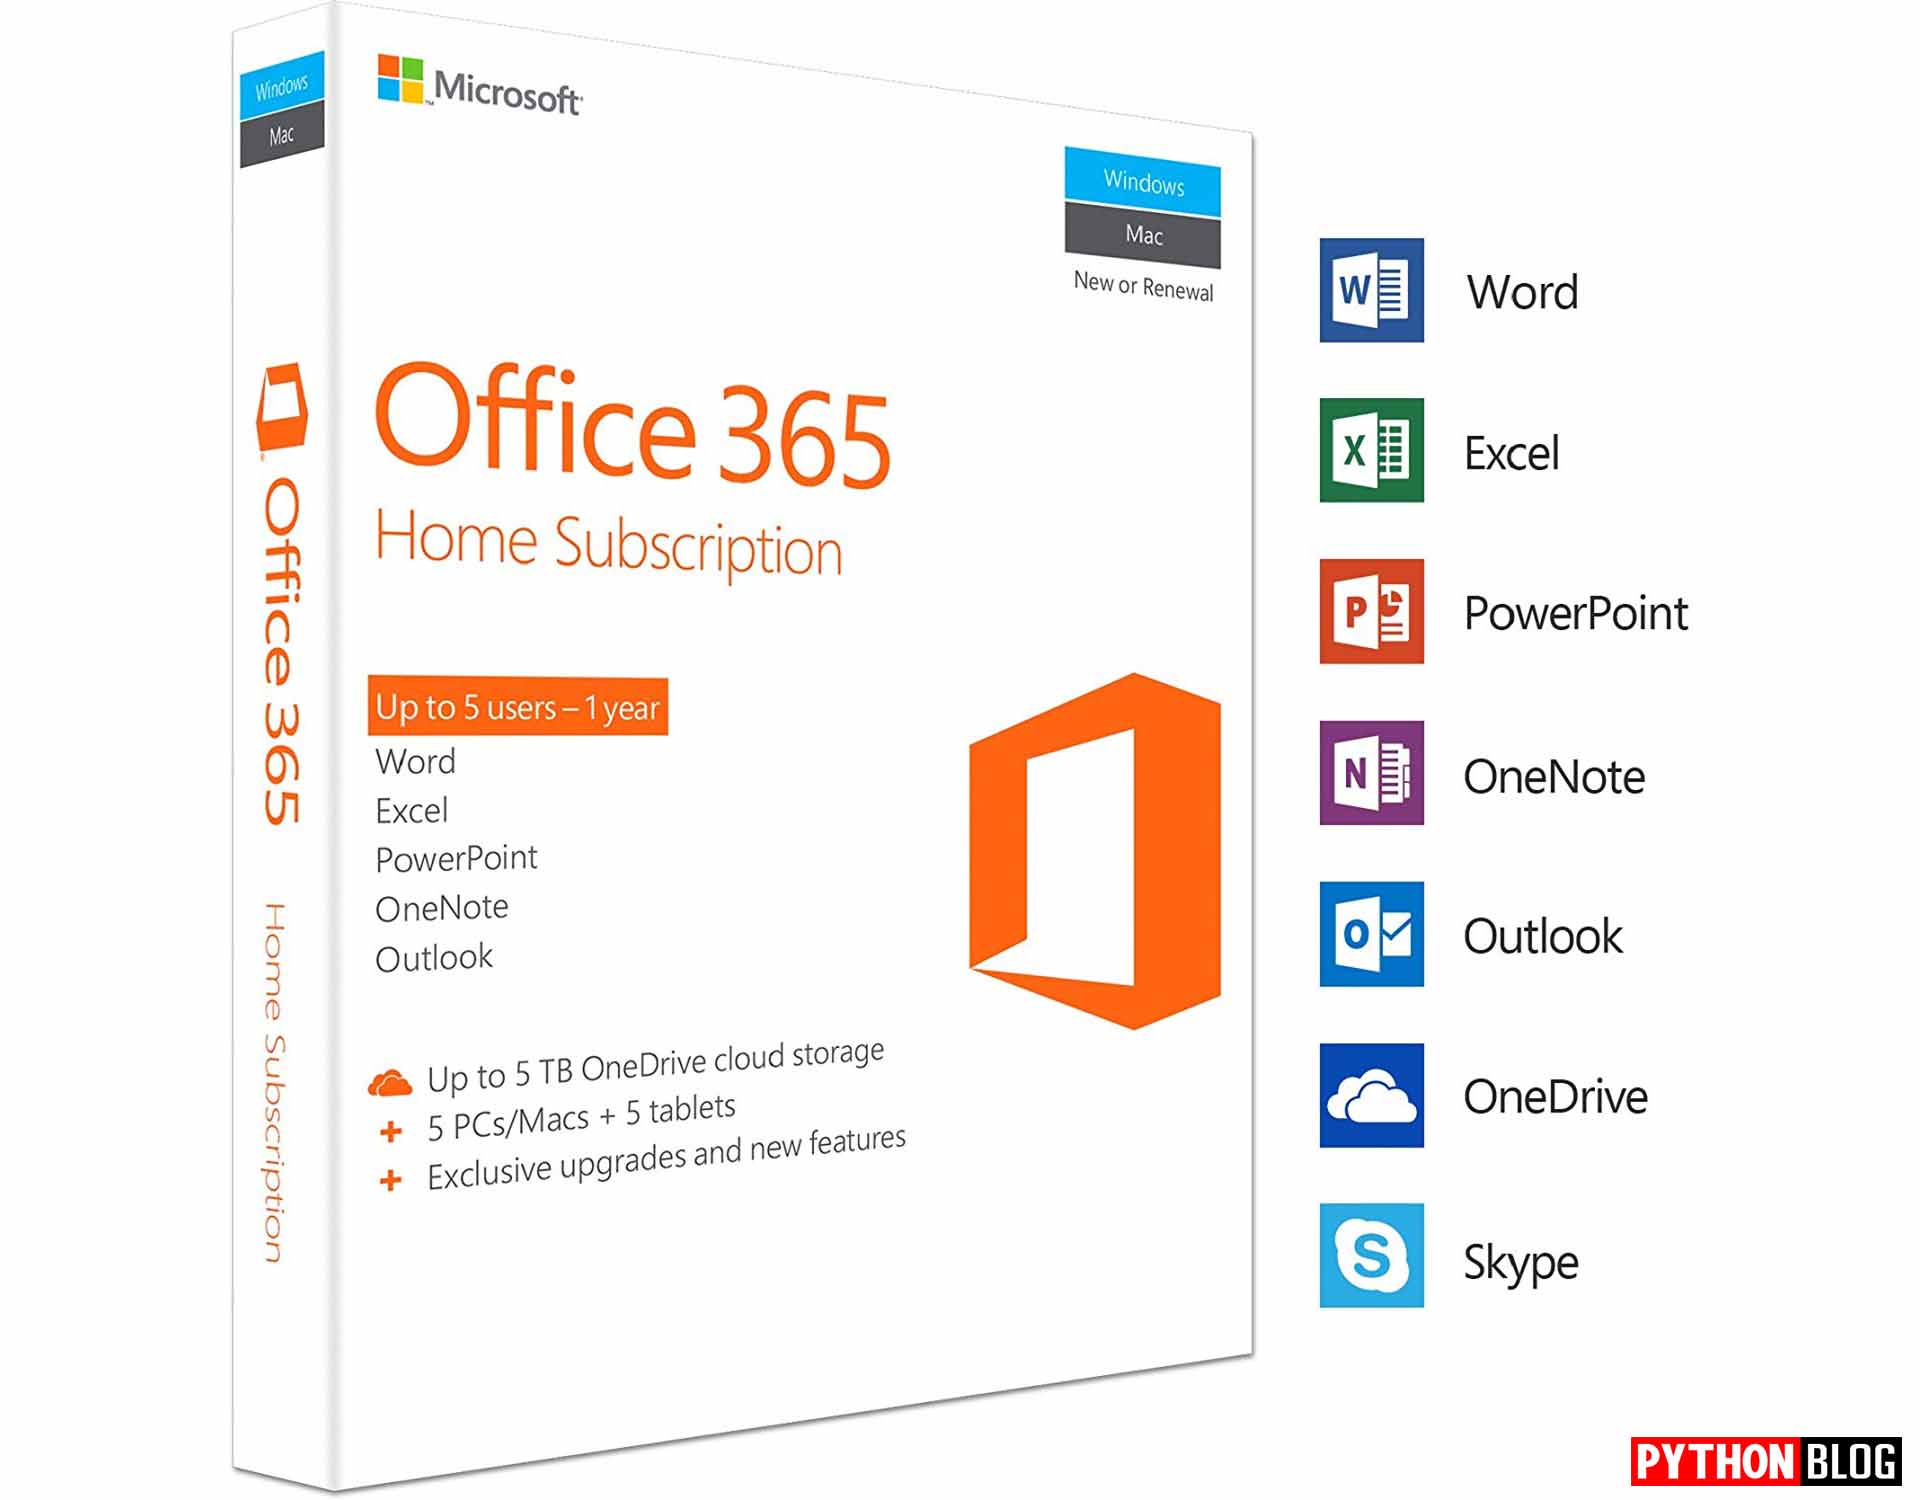 microsoft office 365 product key activation 2016 free